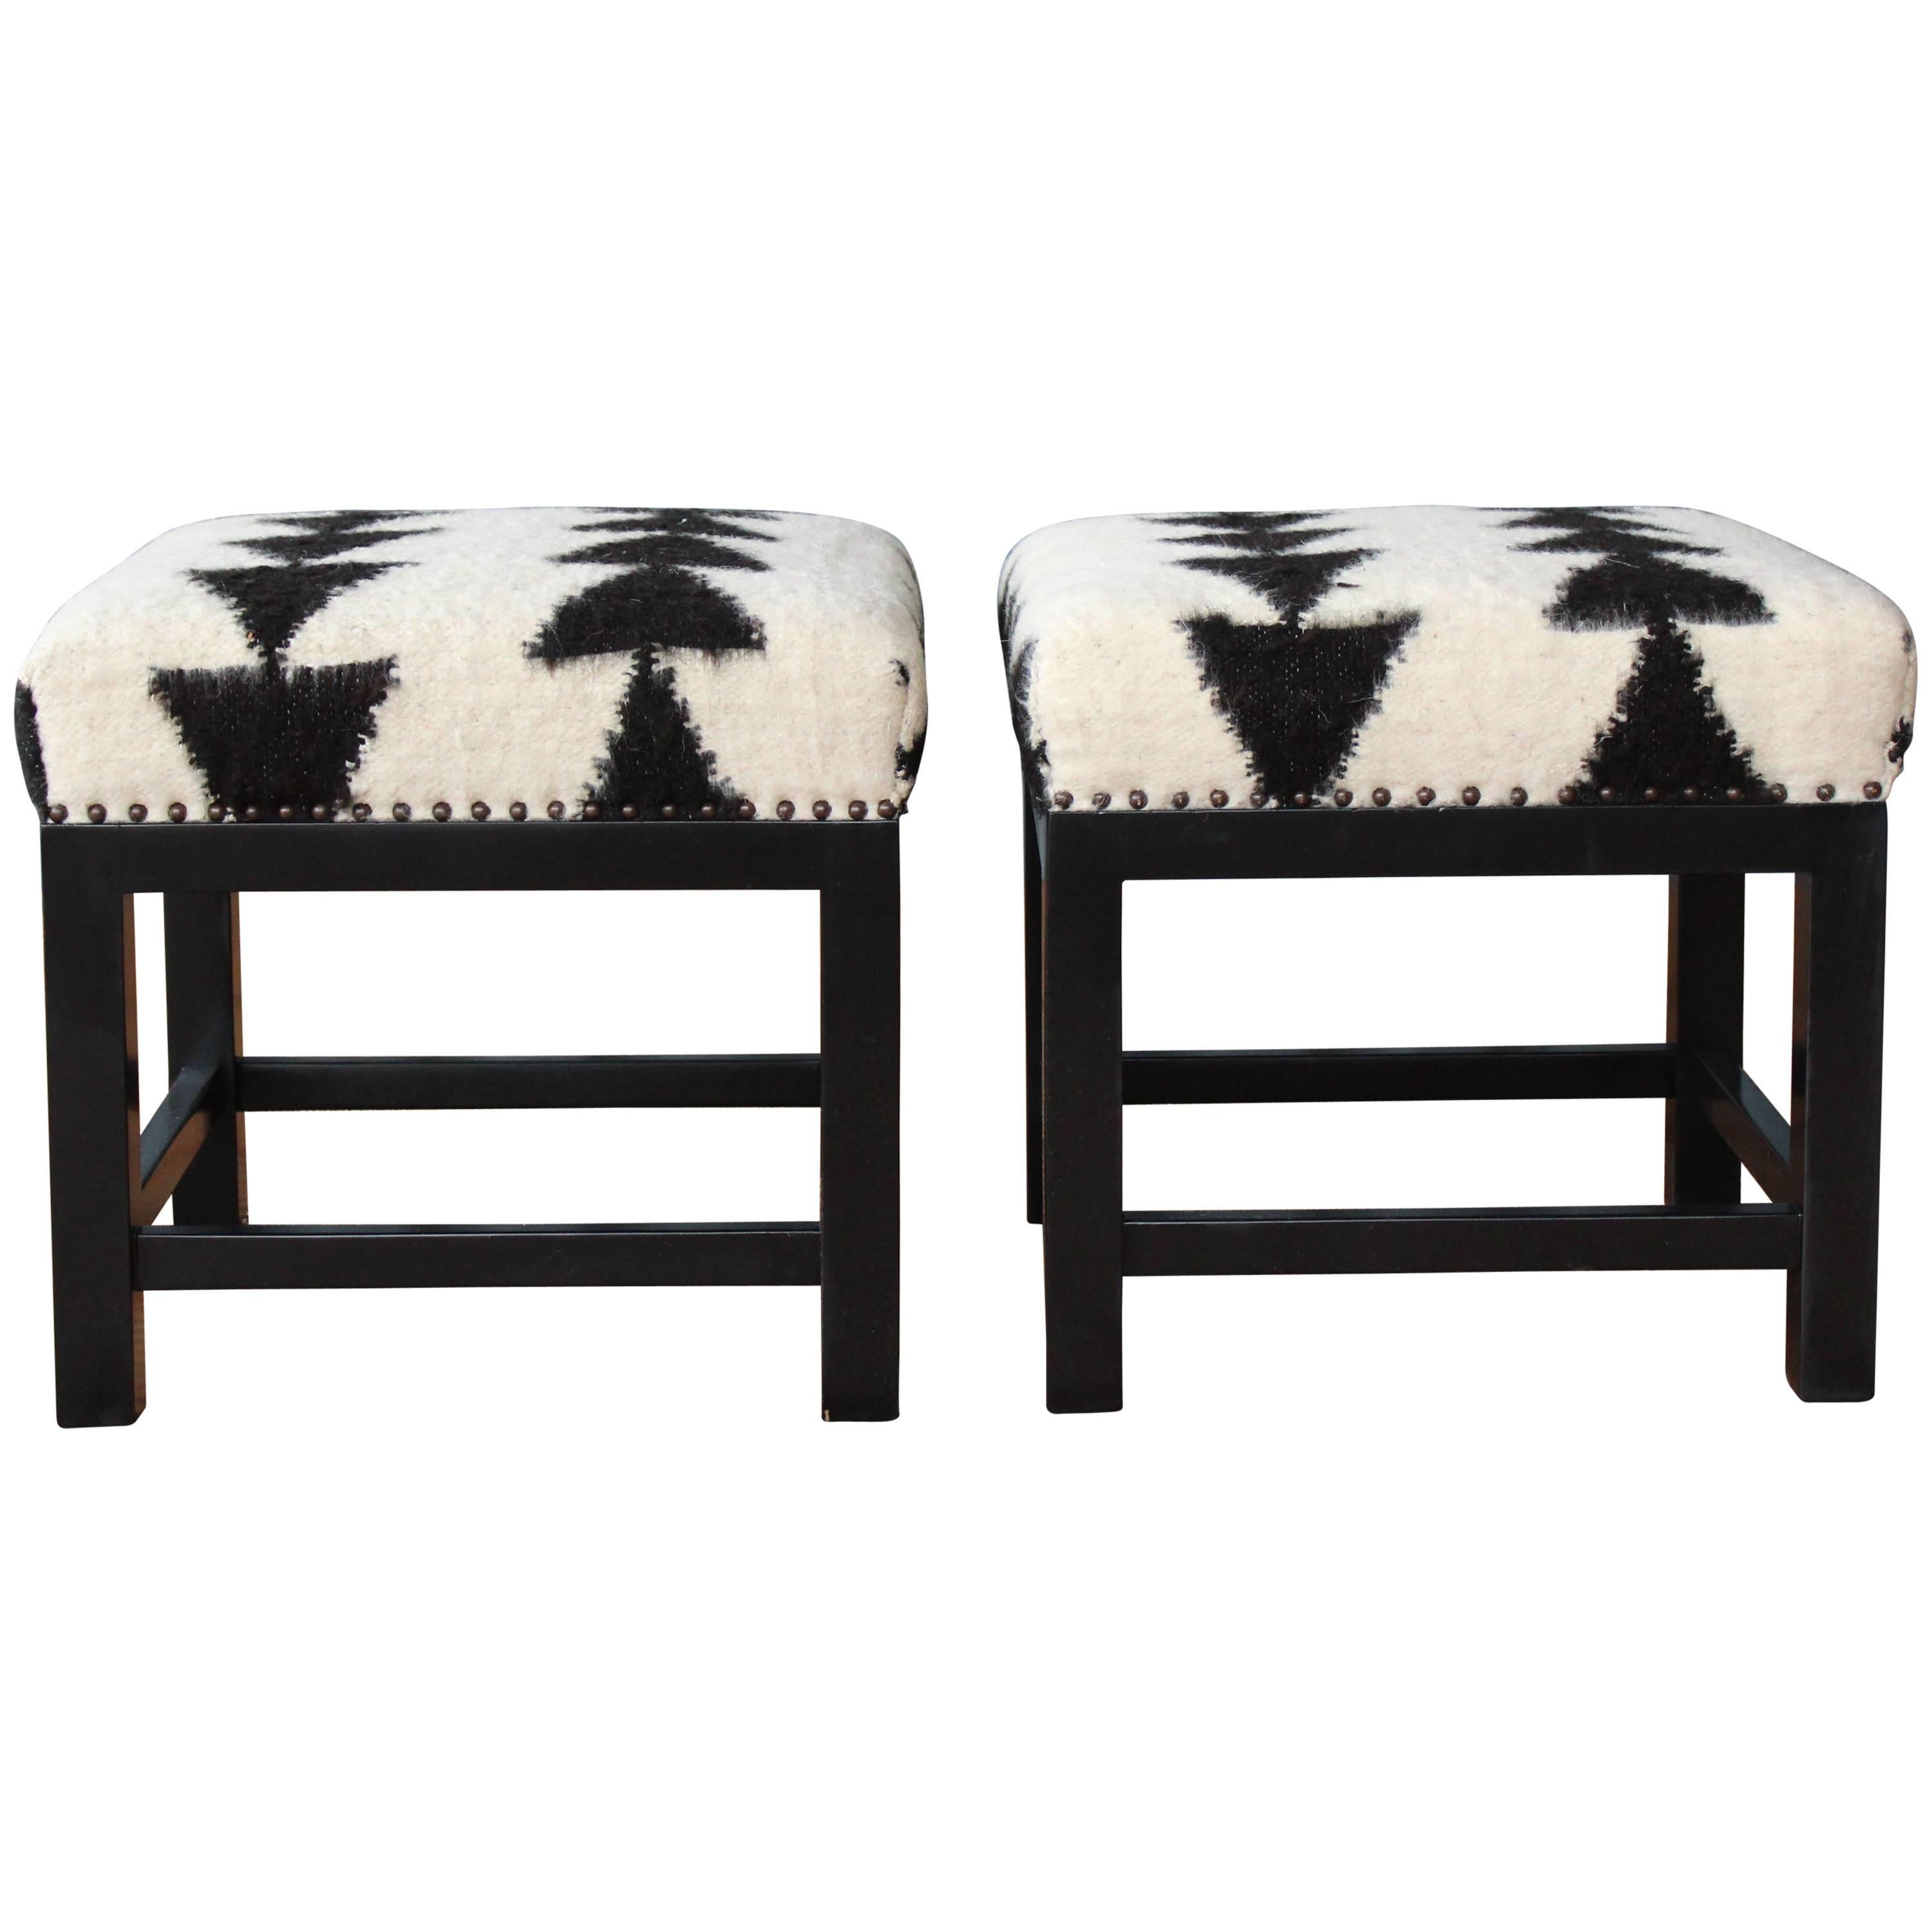 Pair of Stools with Wool Upholstery by Hollywood at Home